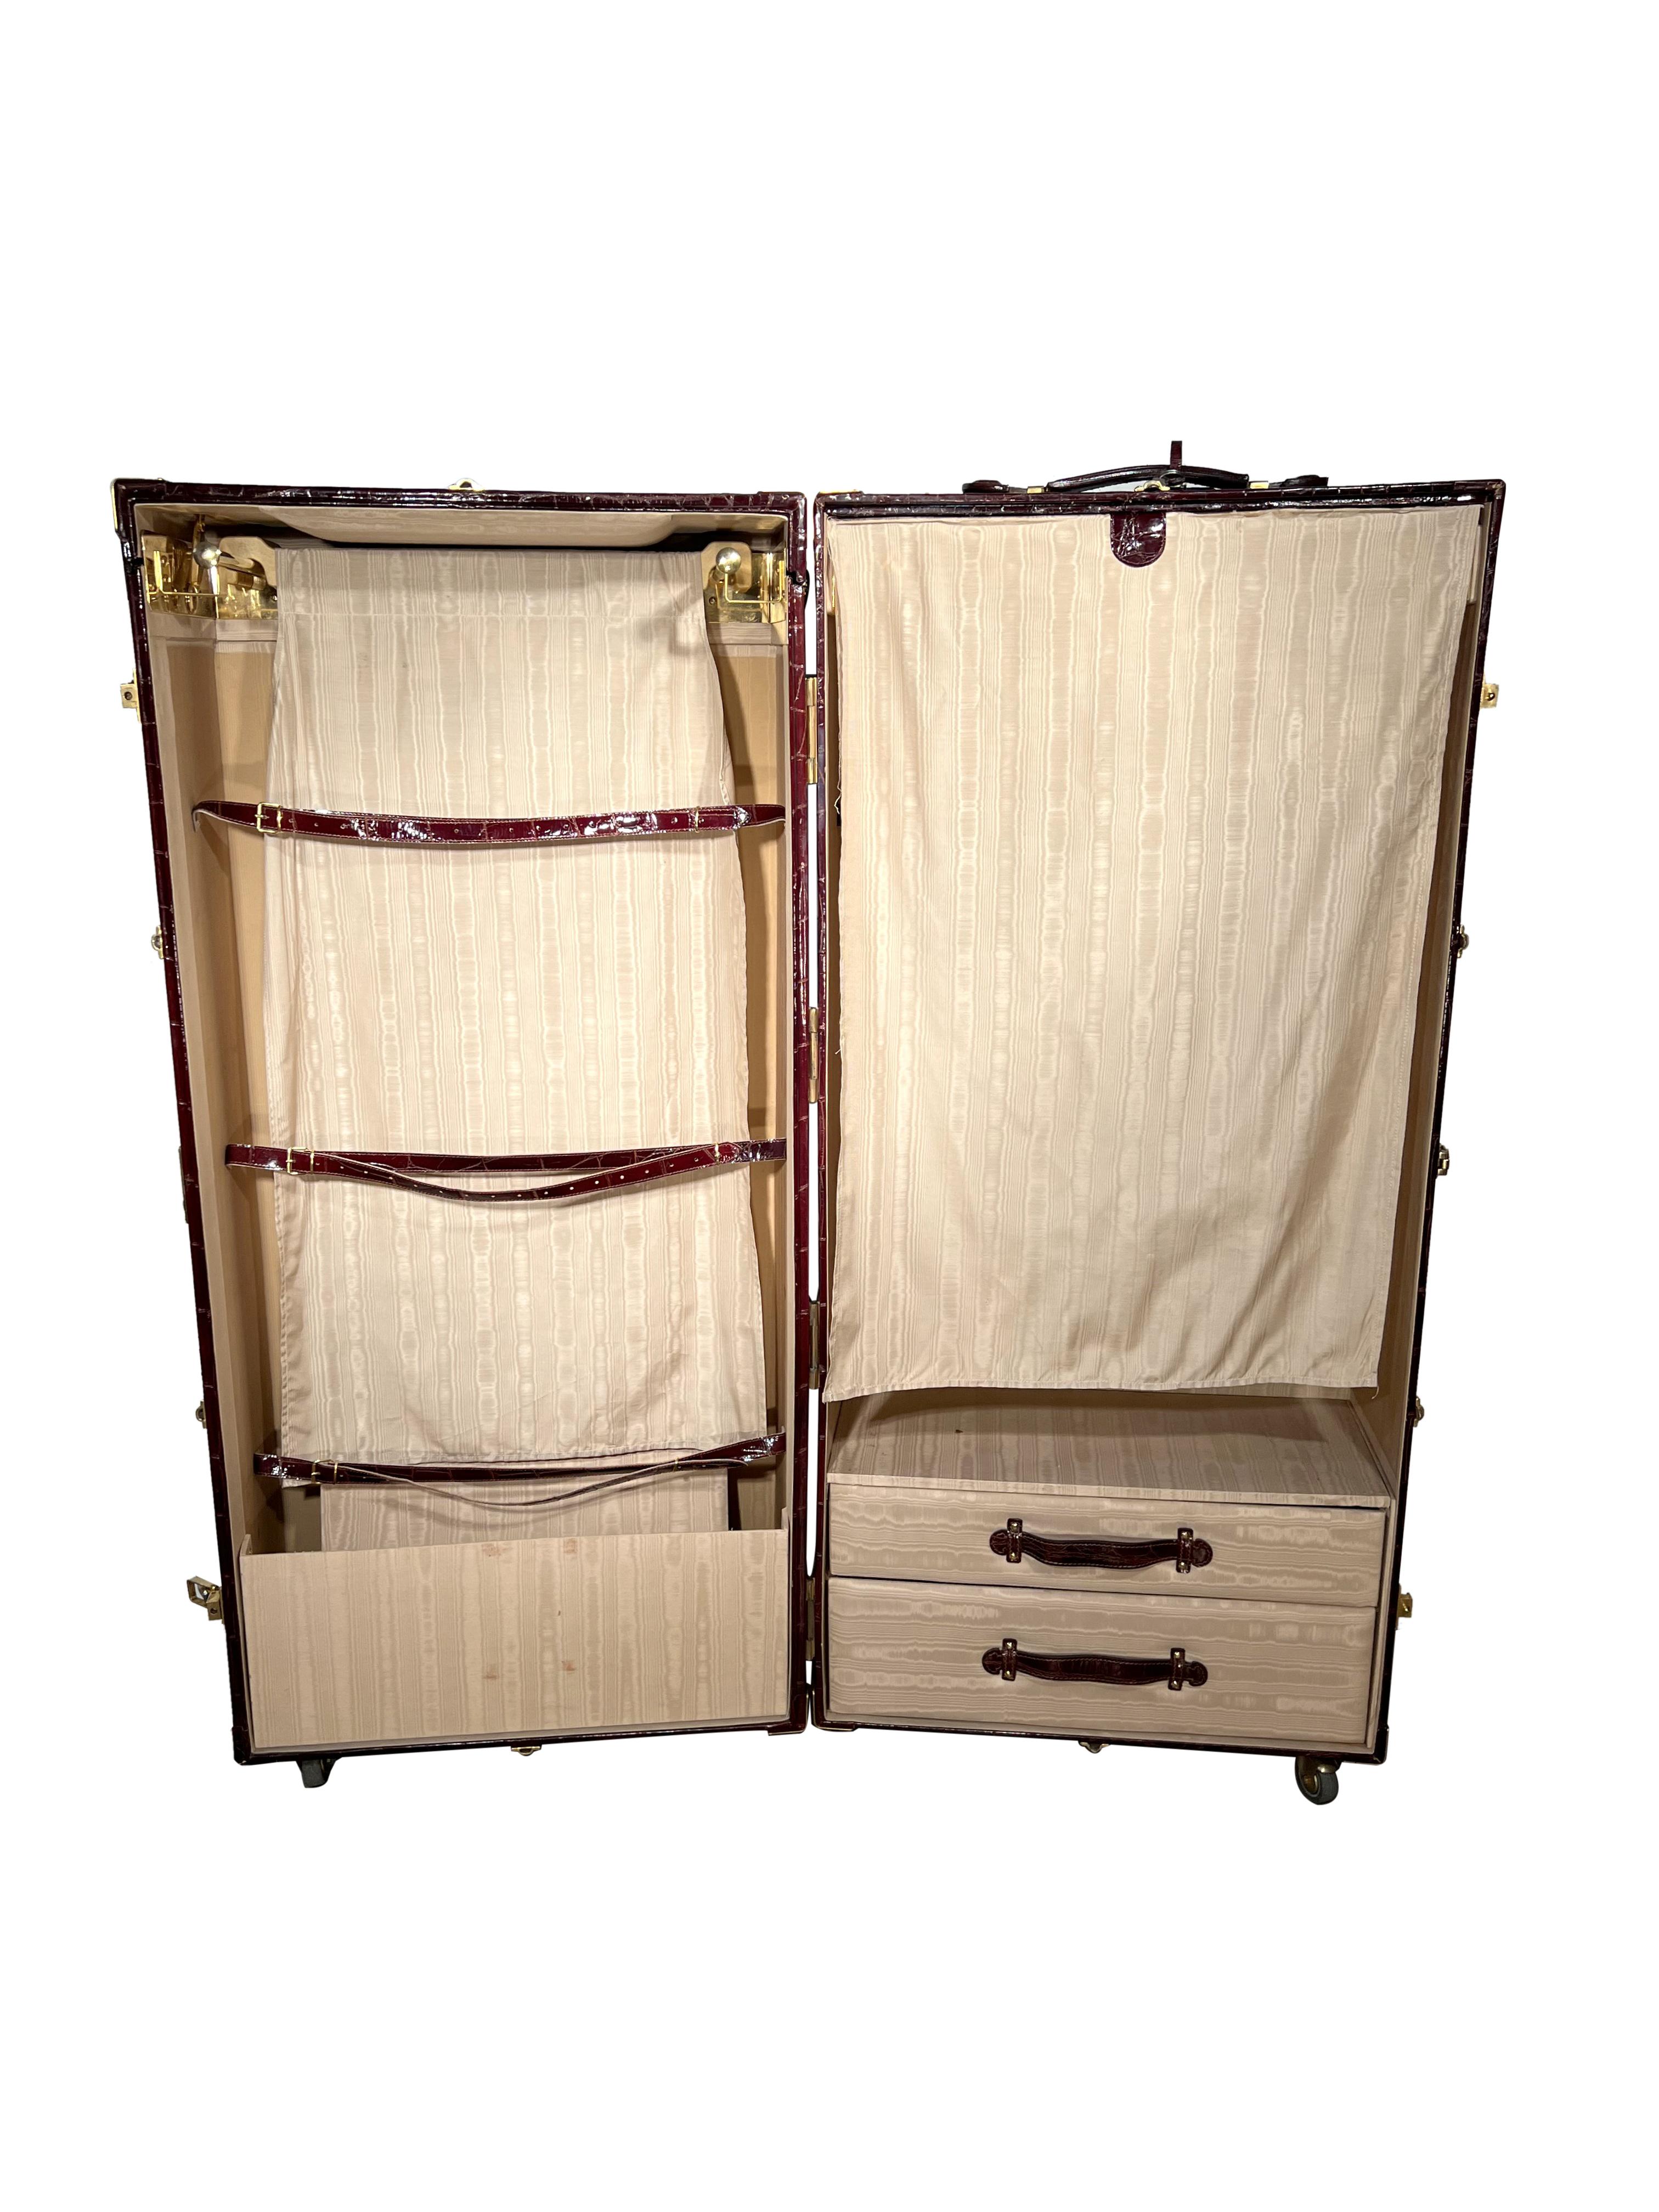 20th Century Large Exotic Embossed Leather Vertical Valet Wardrobe Trunk For Sale 9